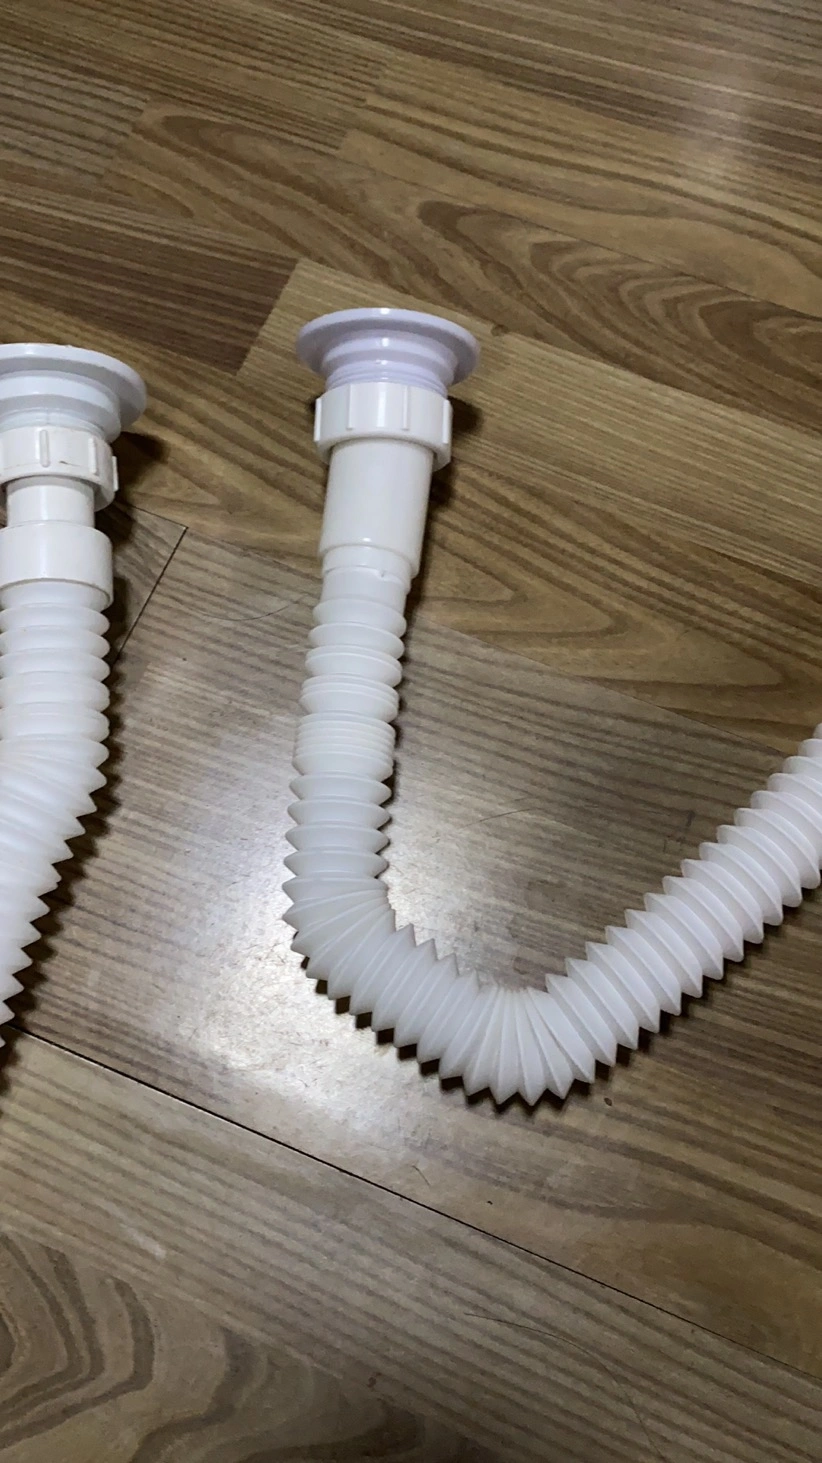 Plastic Waste Hose, Plastic Waste Pipe 1-1/4", 1-1/2" for Sink and Basin Waste